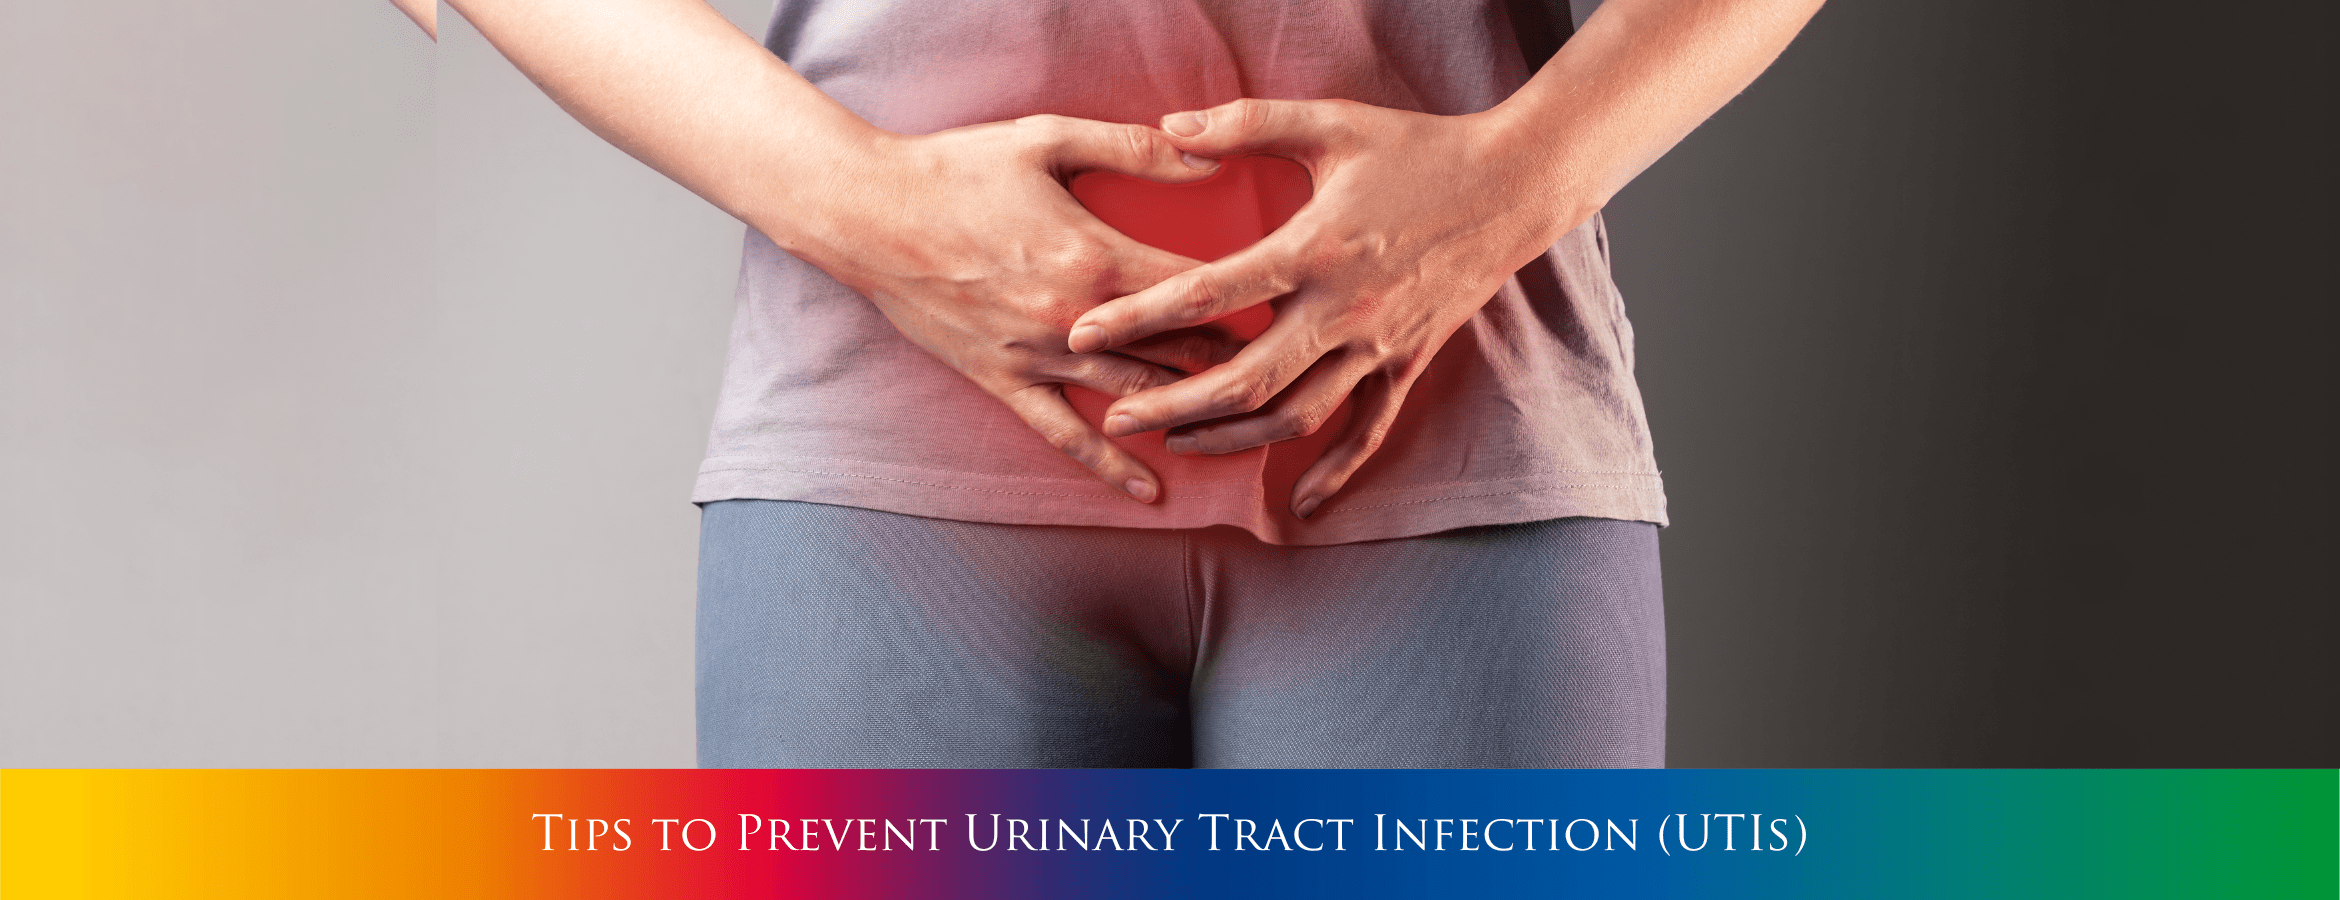 Tips to Prevent Urinary Tract Infection (UTIs)